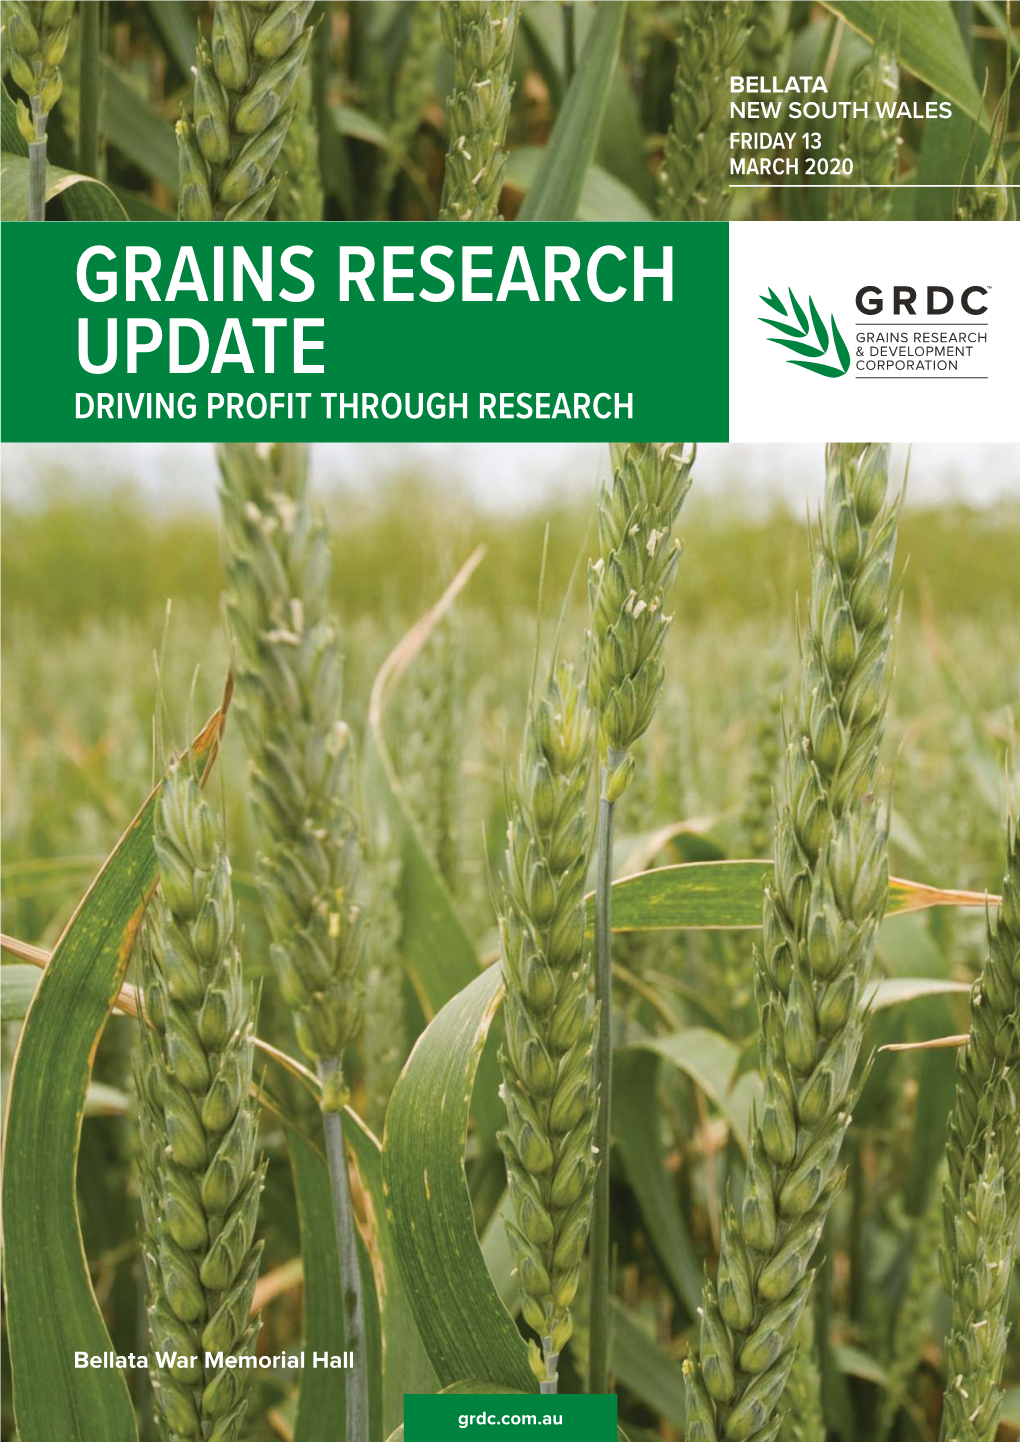 Grains Research Update Driving Profit Through Research